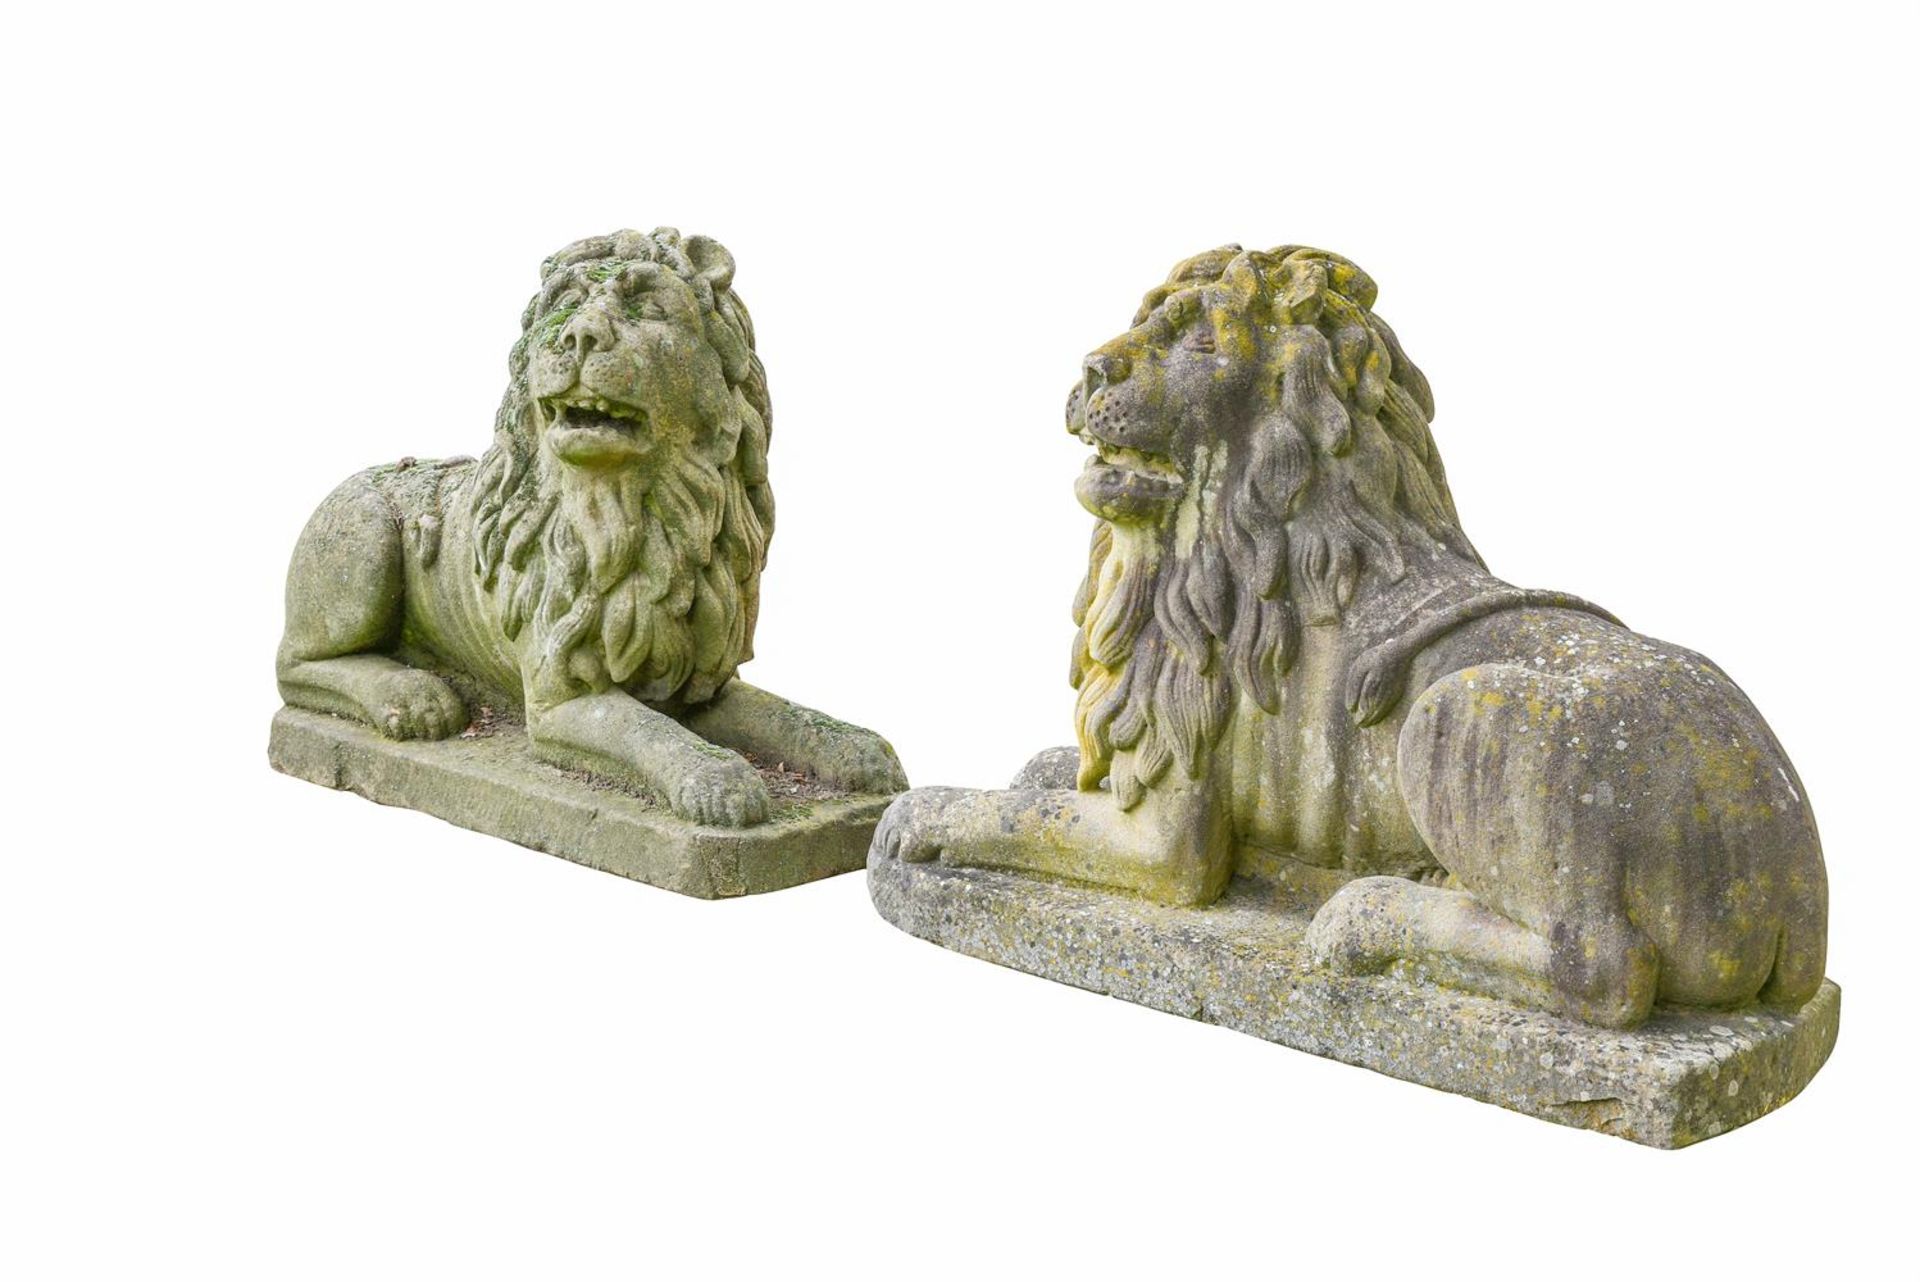 A PAIR OF ITALIAN CARVED STONE RECUMBENT LIONS, LATE 19TH CENTURY - Image 3 of 3